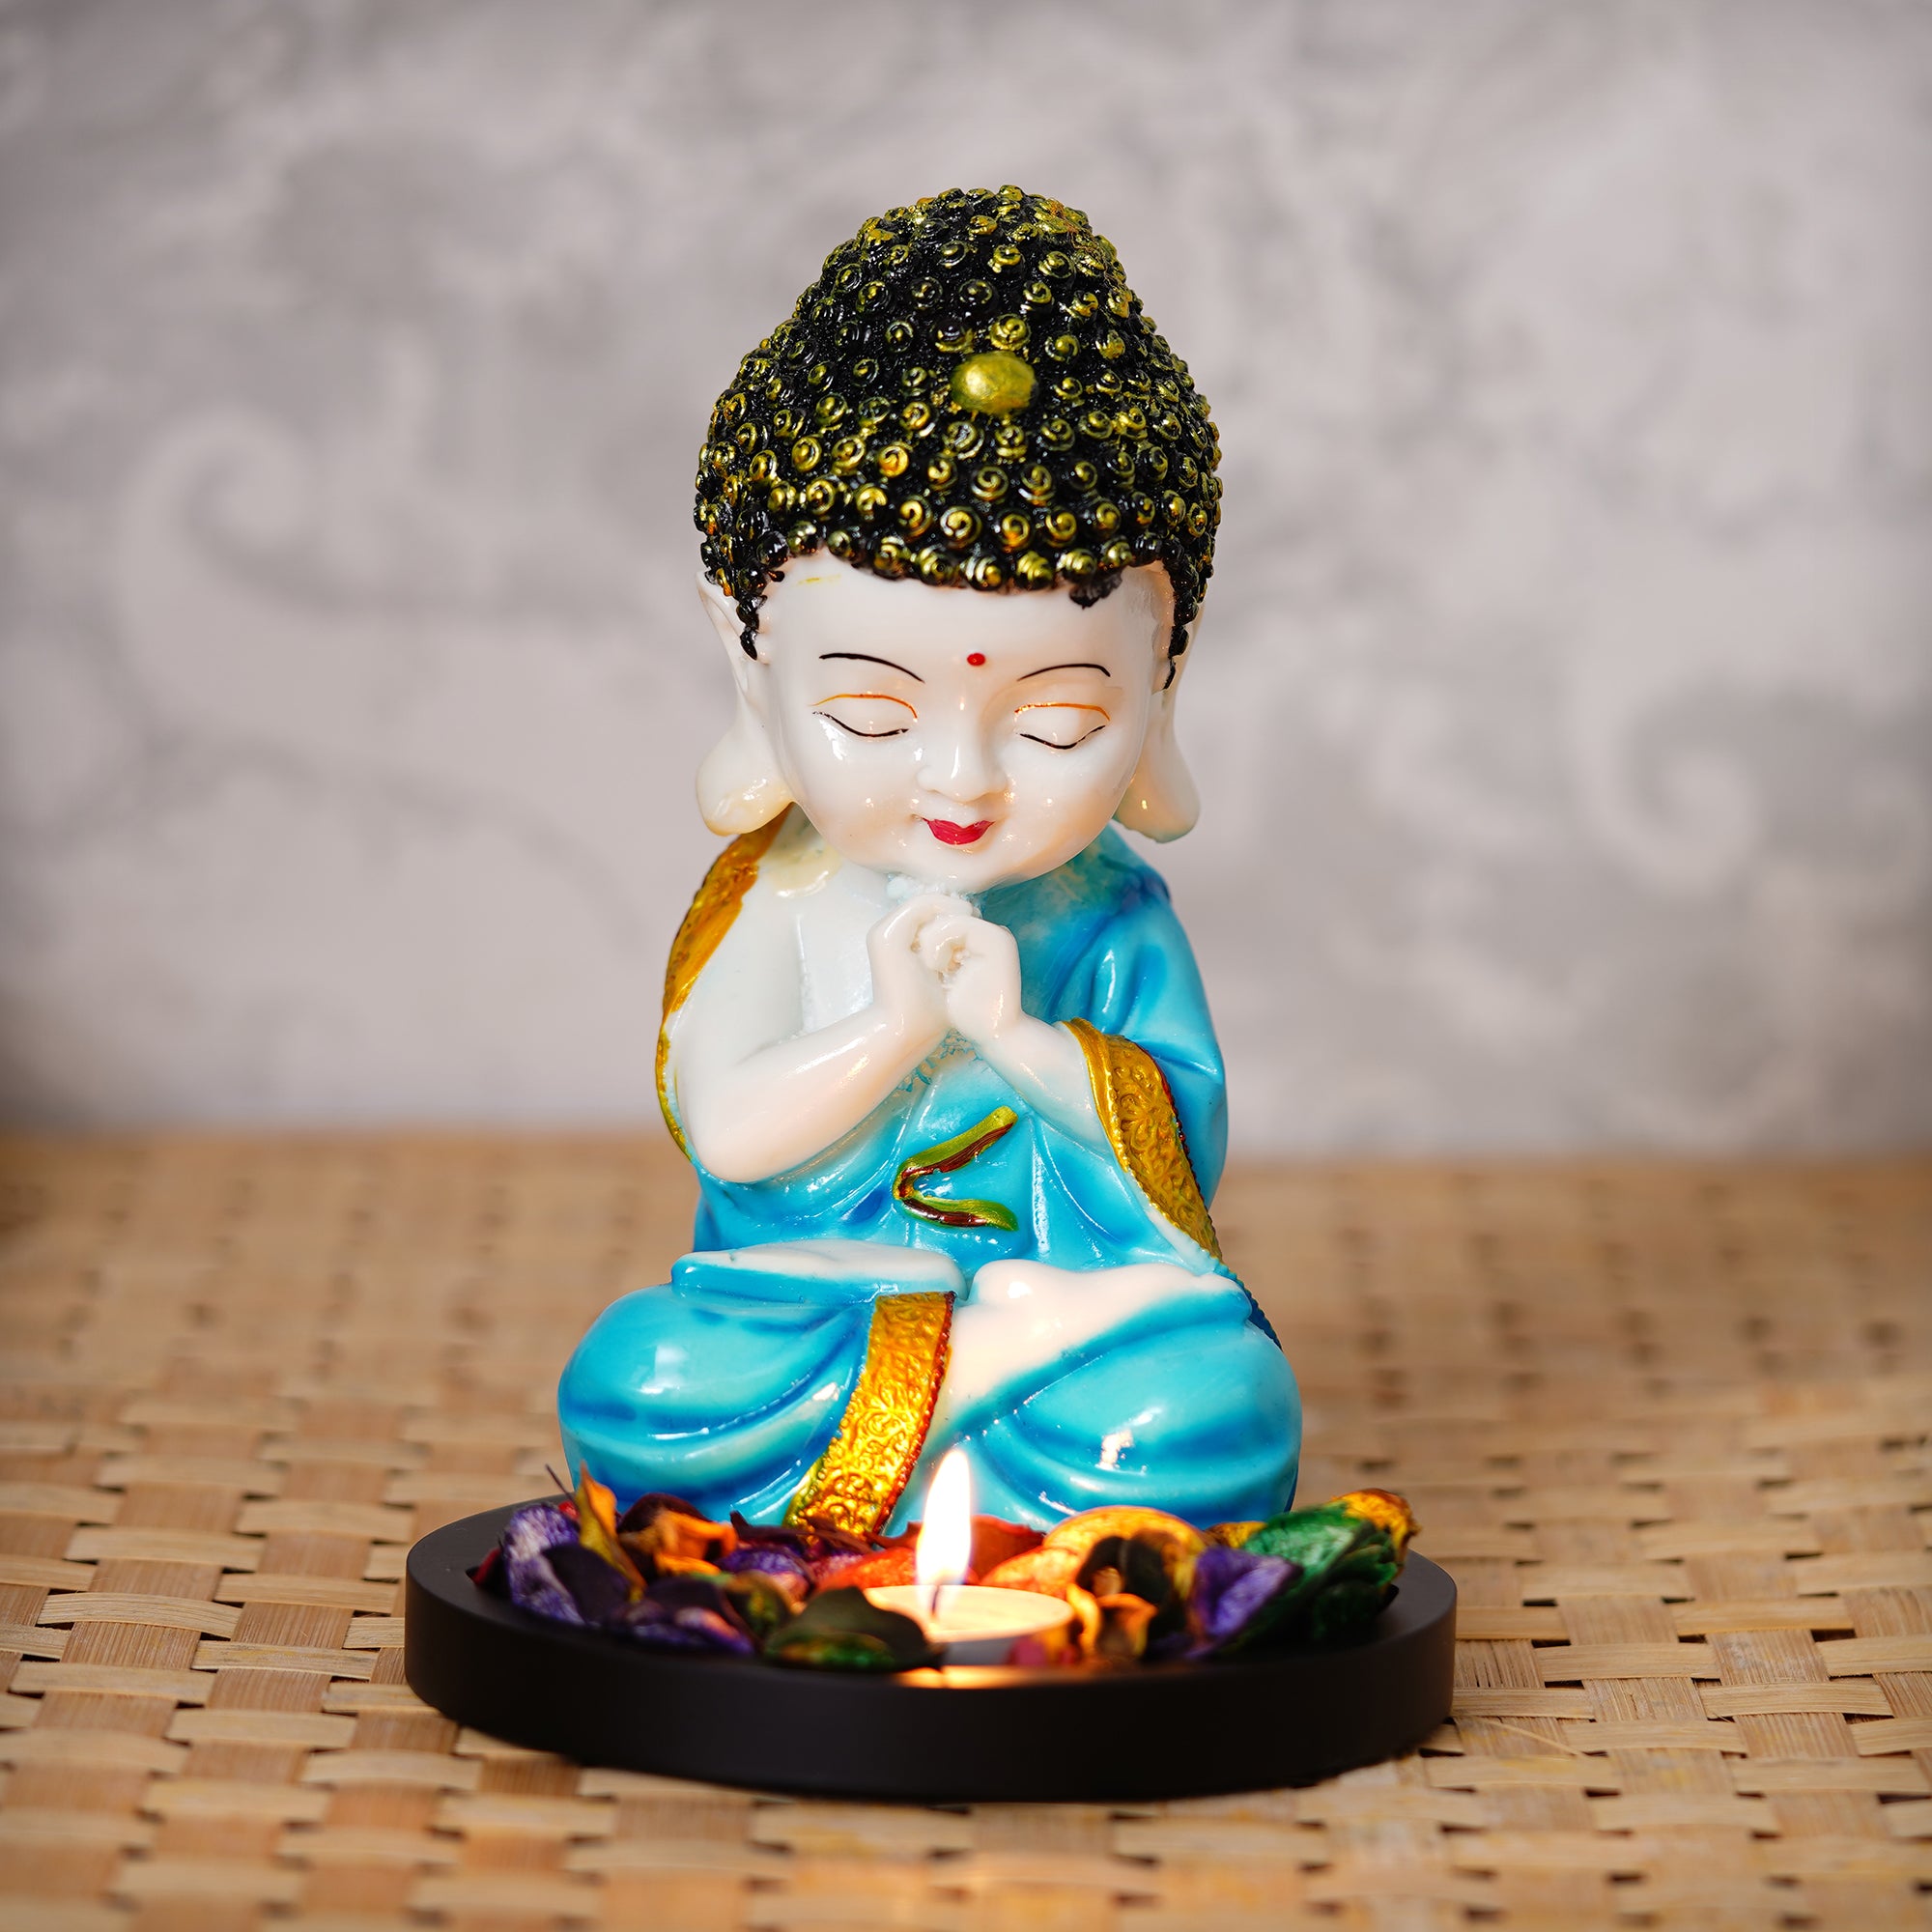 Polyresin Blue and White Praying Monk Buddha Statue with Wooden Base, Fragranced Petals and Tealight